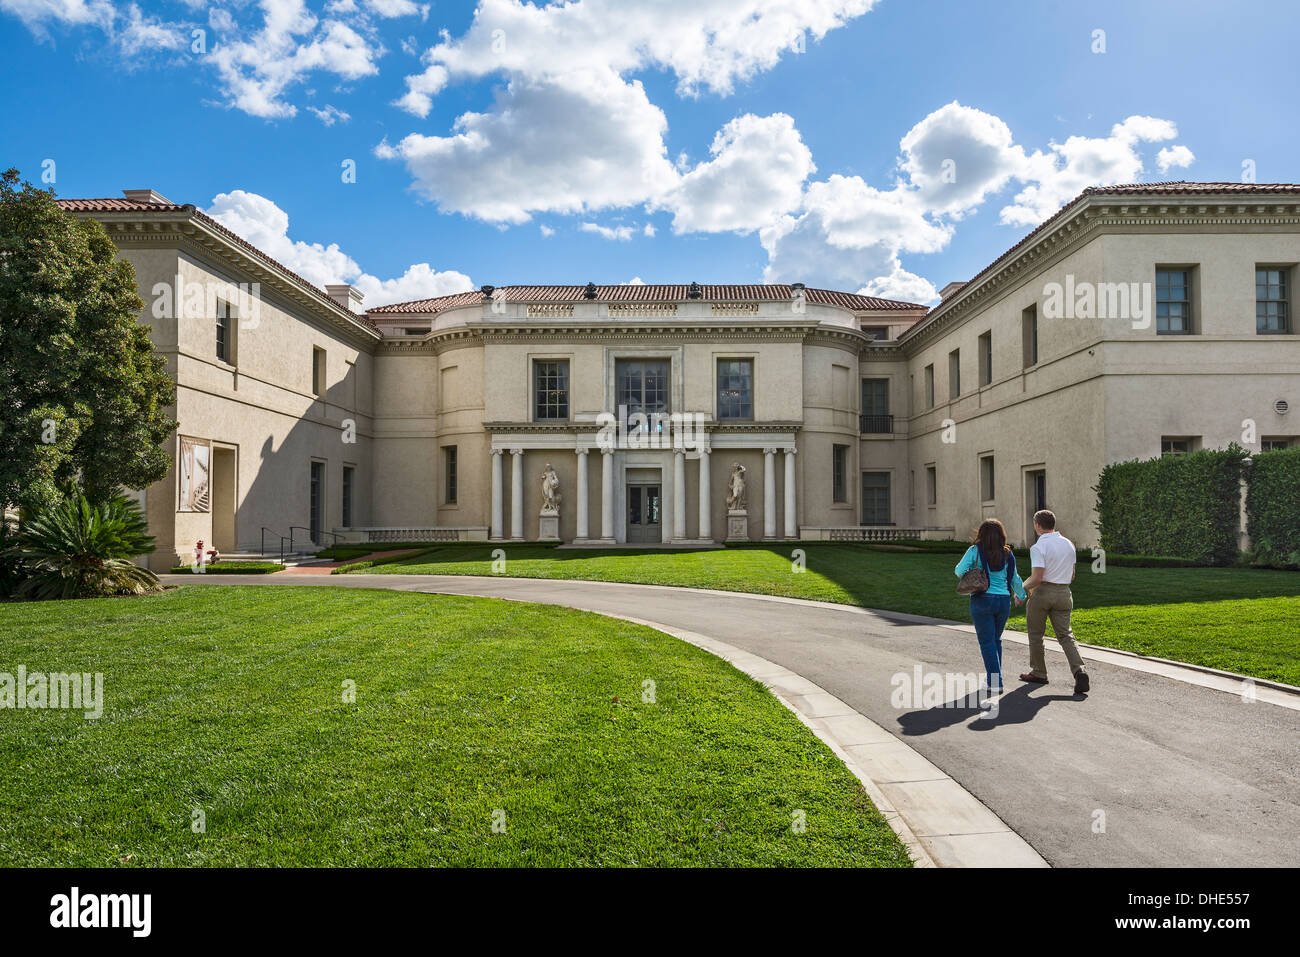 The magnificent Huntington Art Gallery. Stock Photo